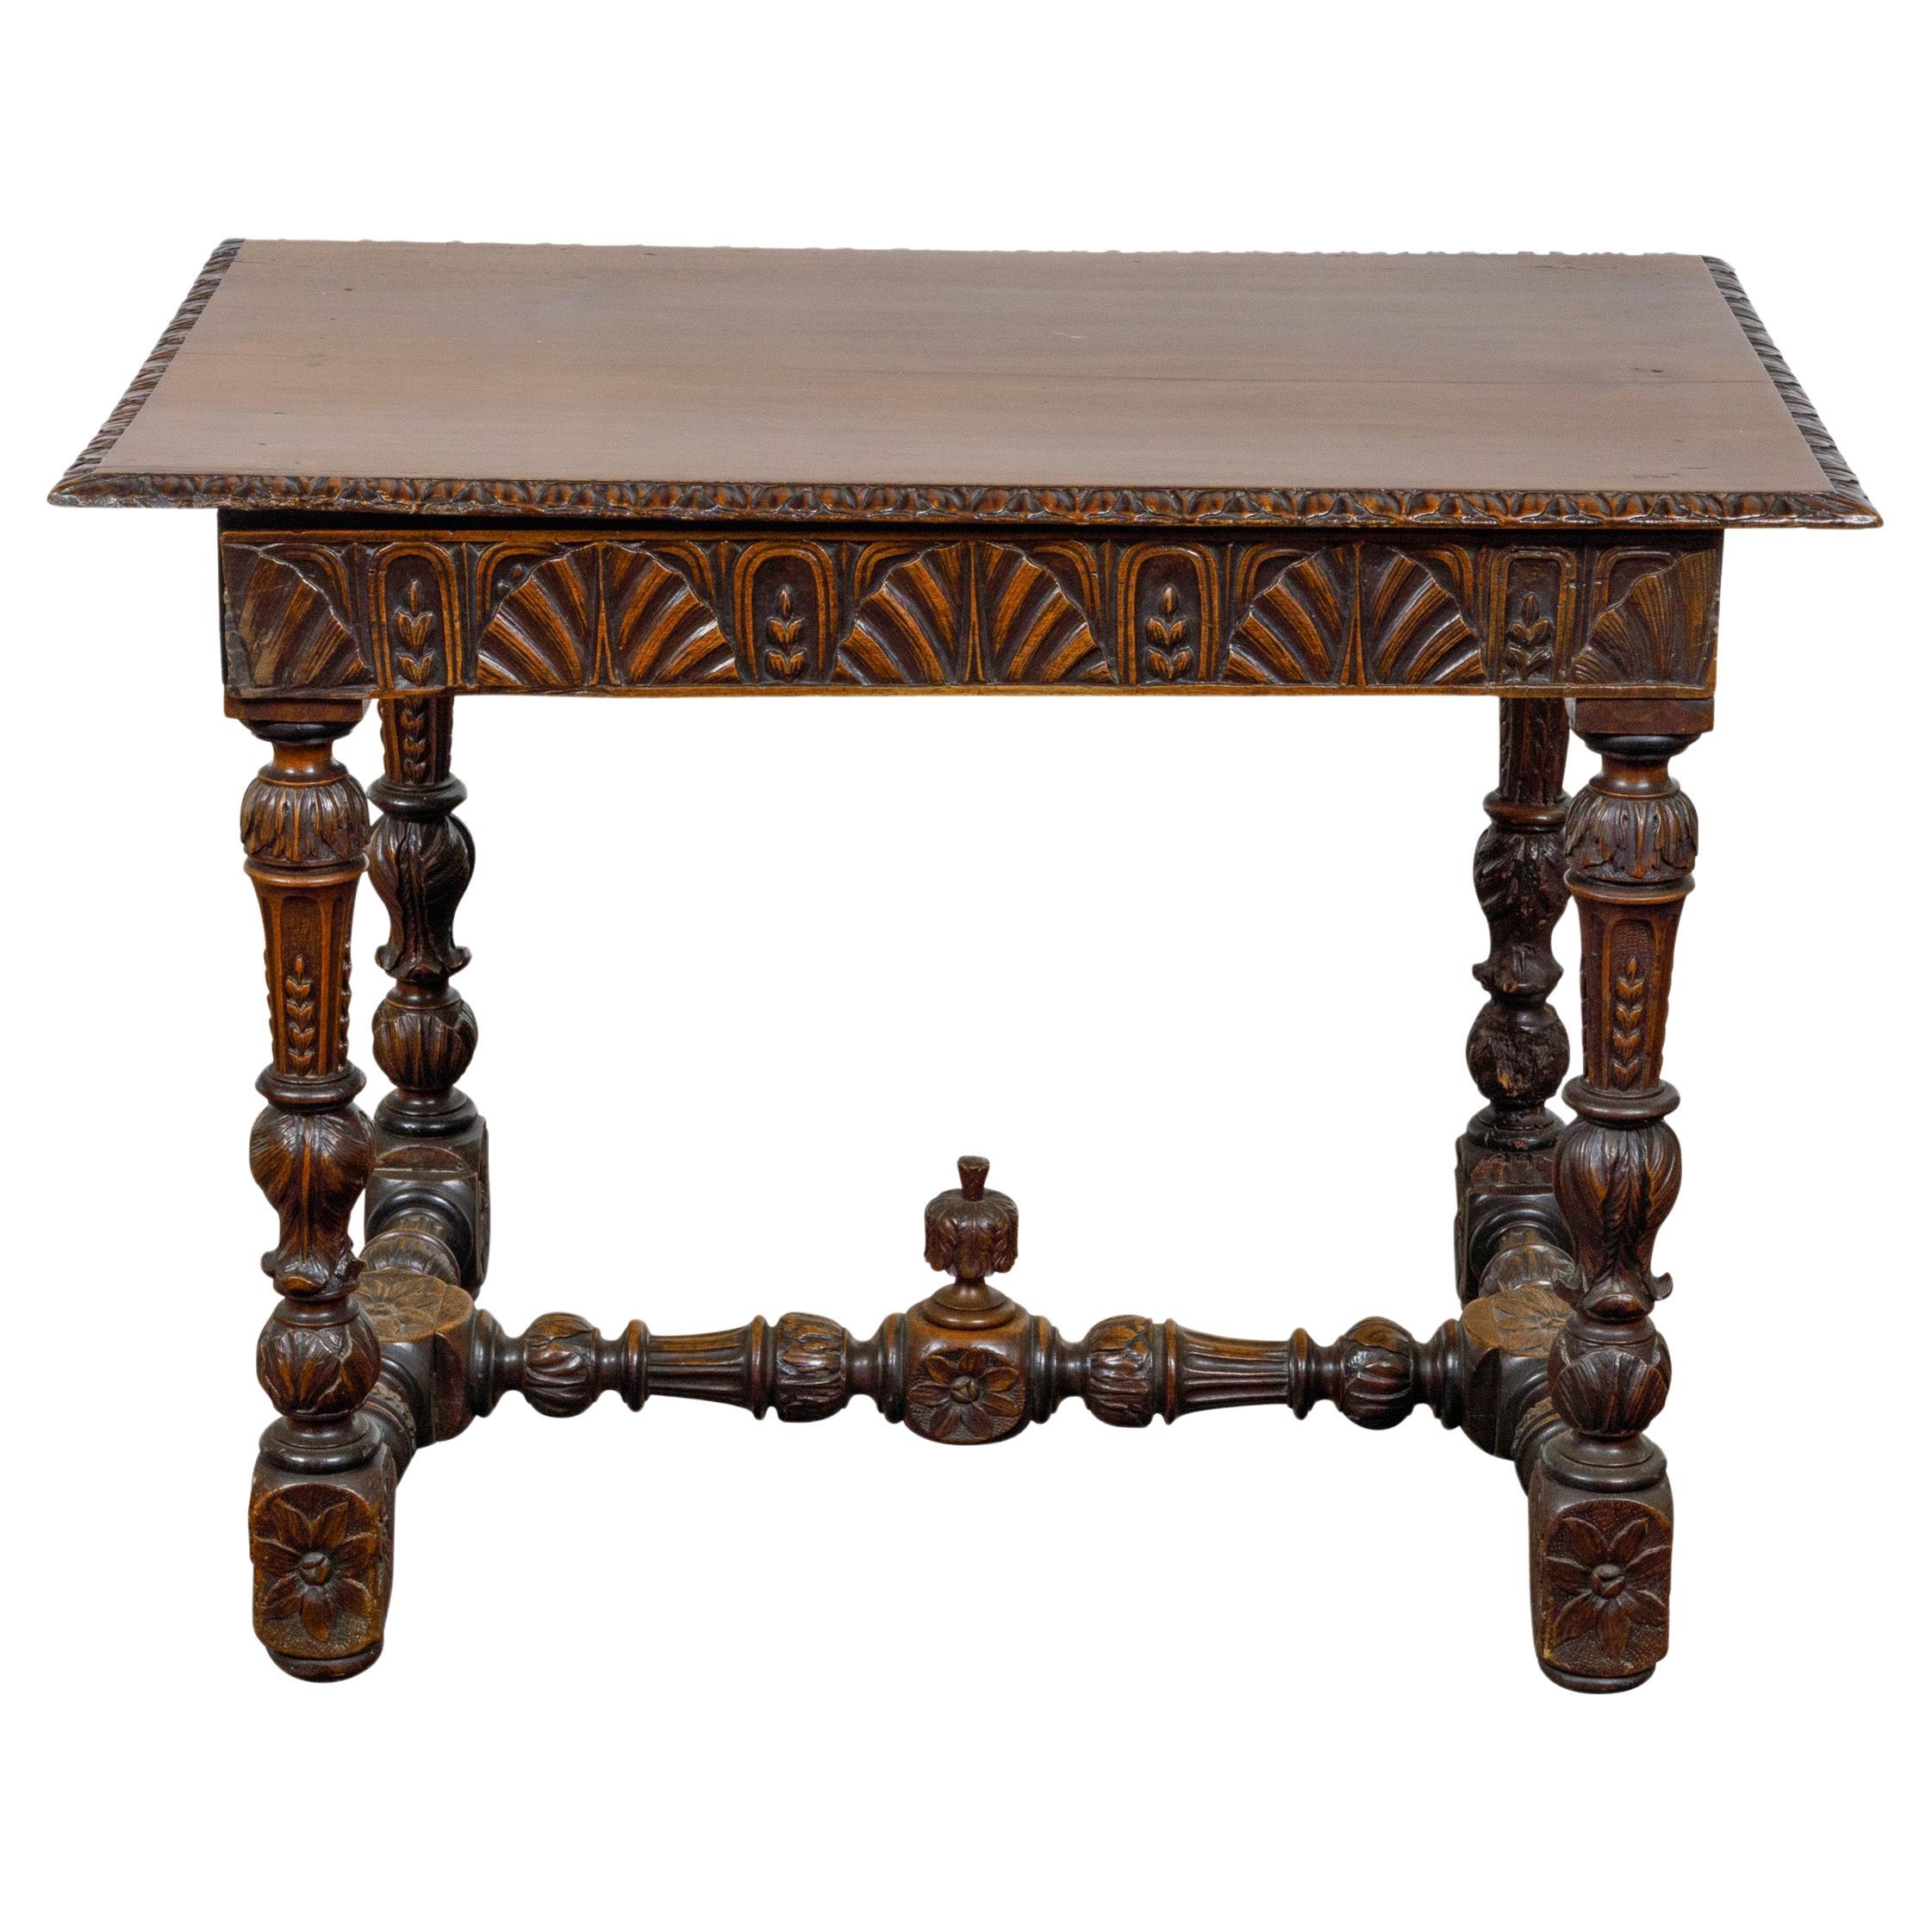 French 19th Century Walnut Side Table with Carved Apron and H-Form Stretcher